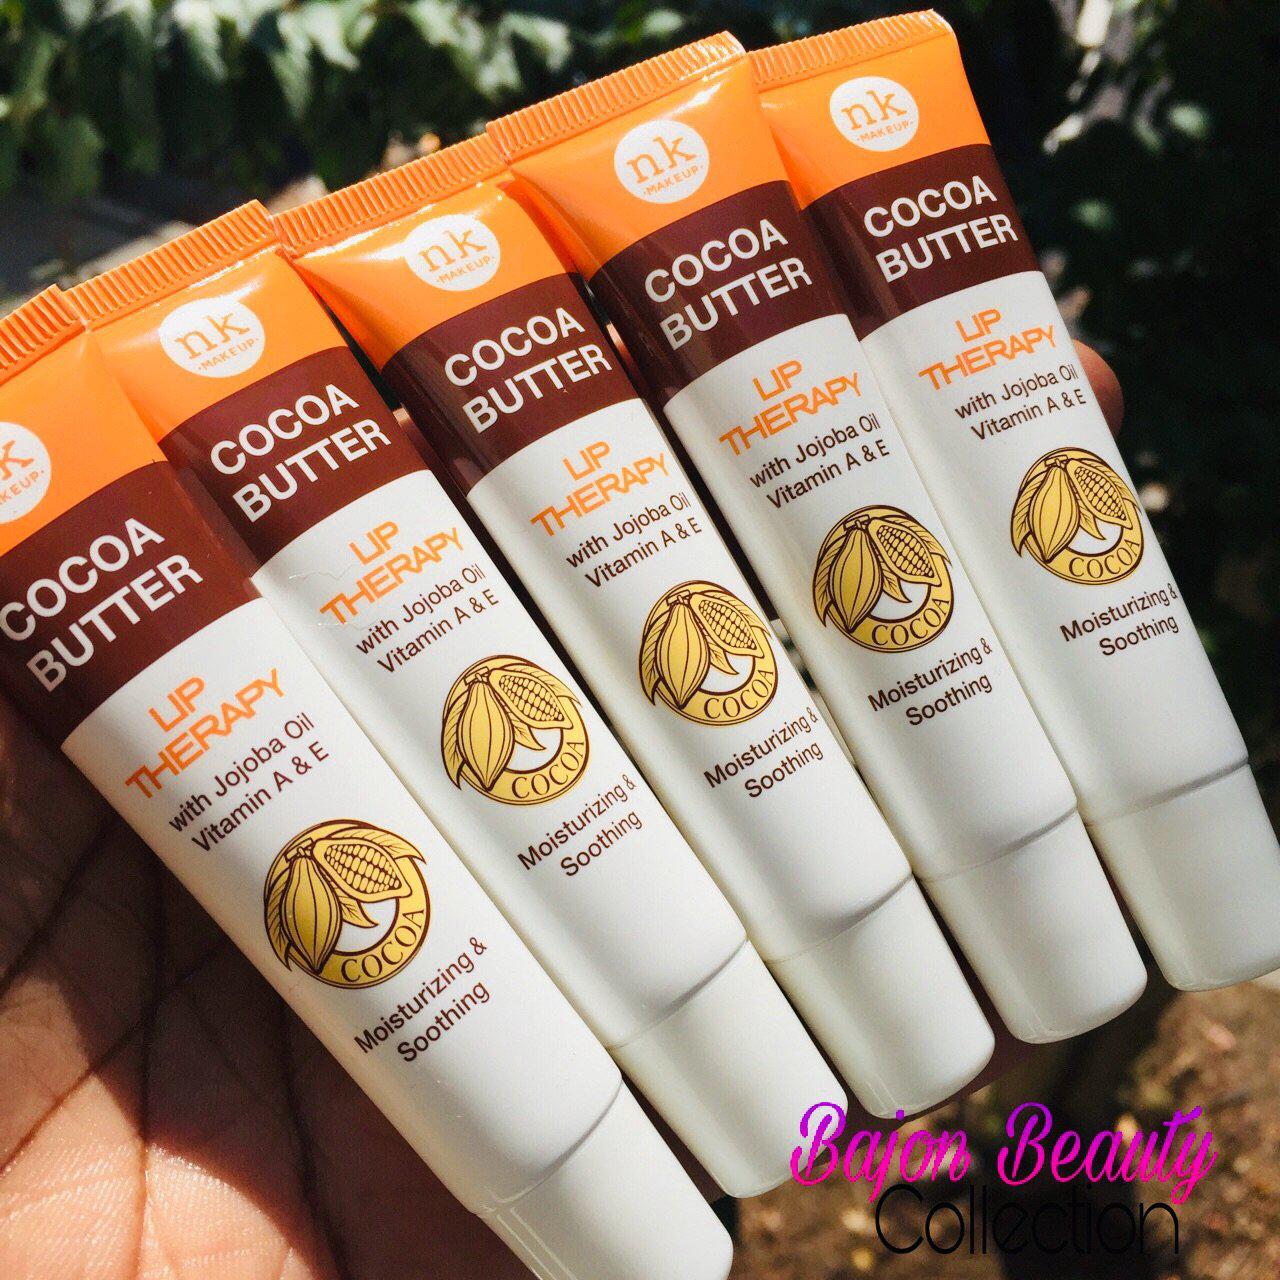 Nicka K Cocoa Butter Lip Therapy